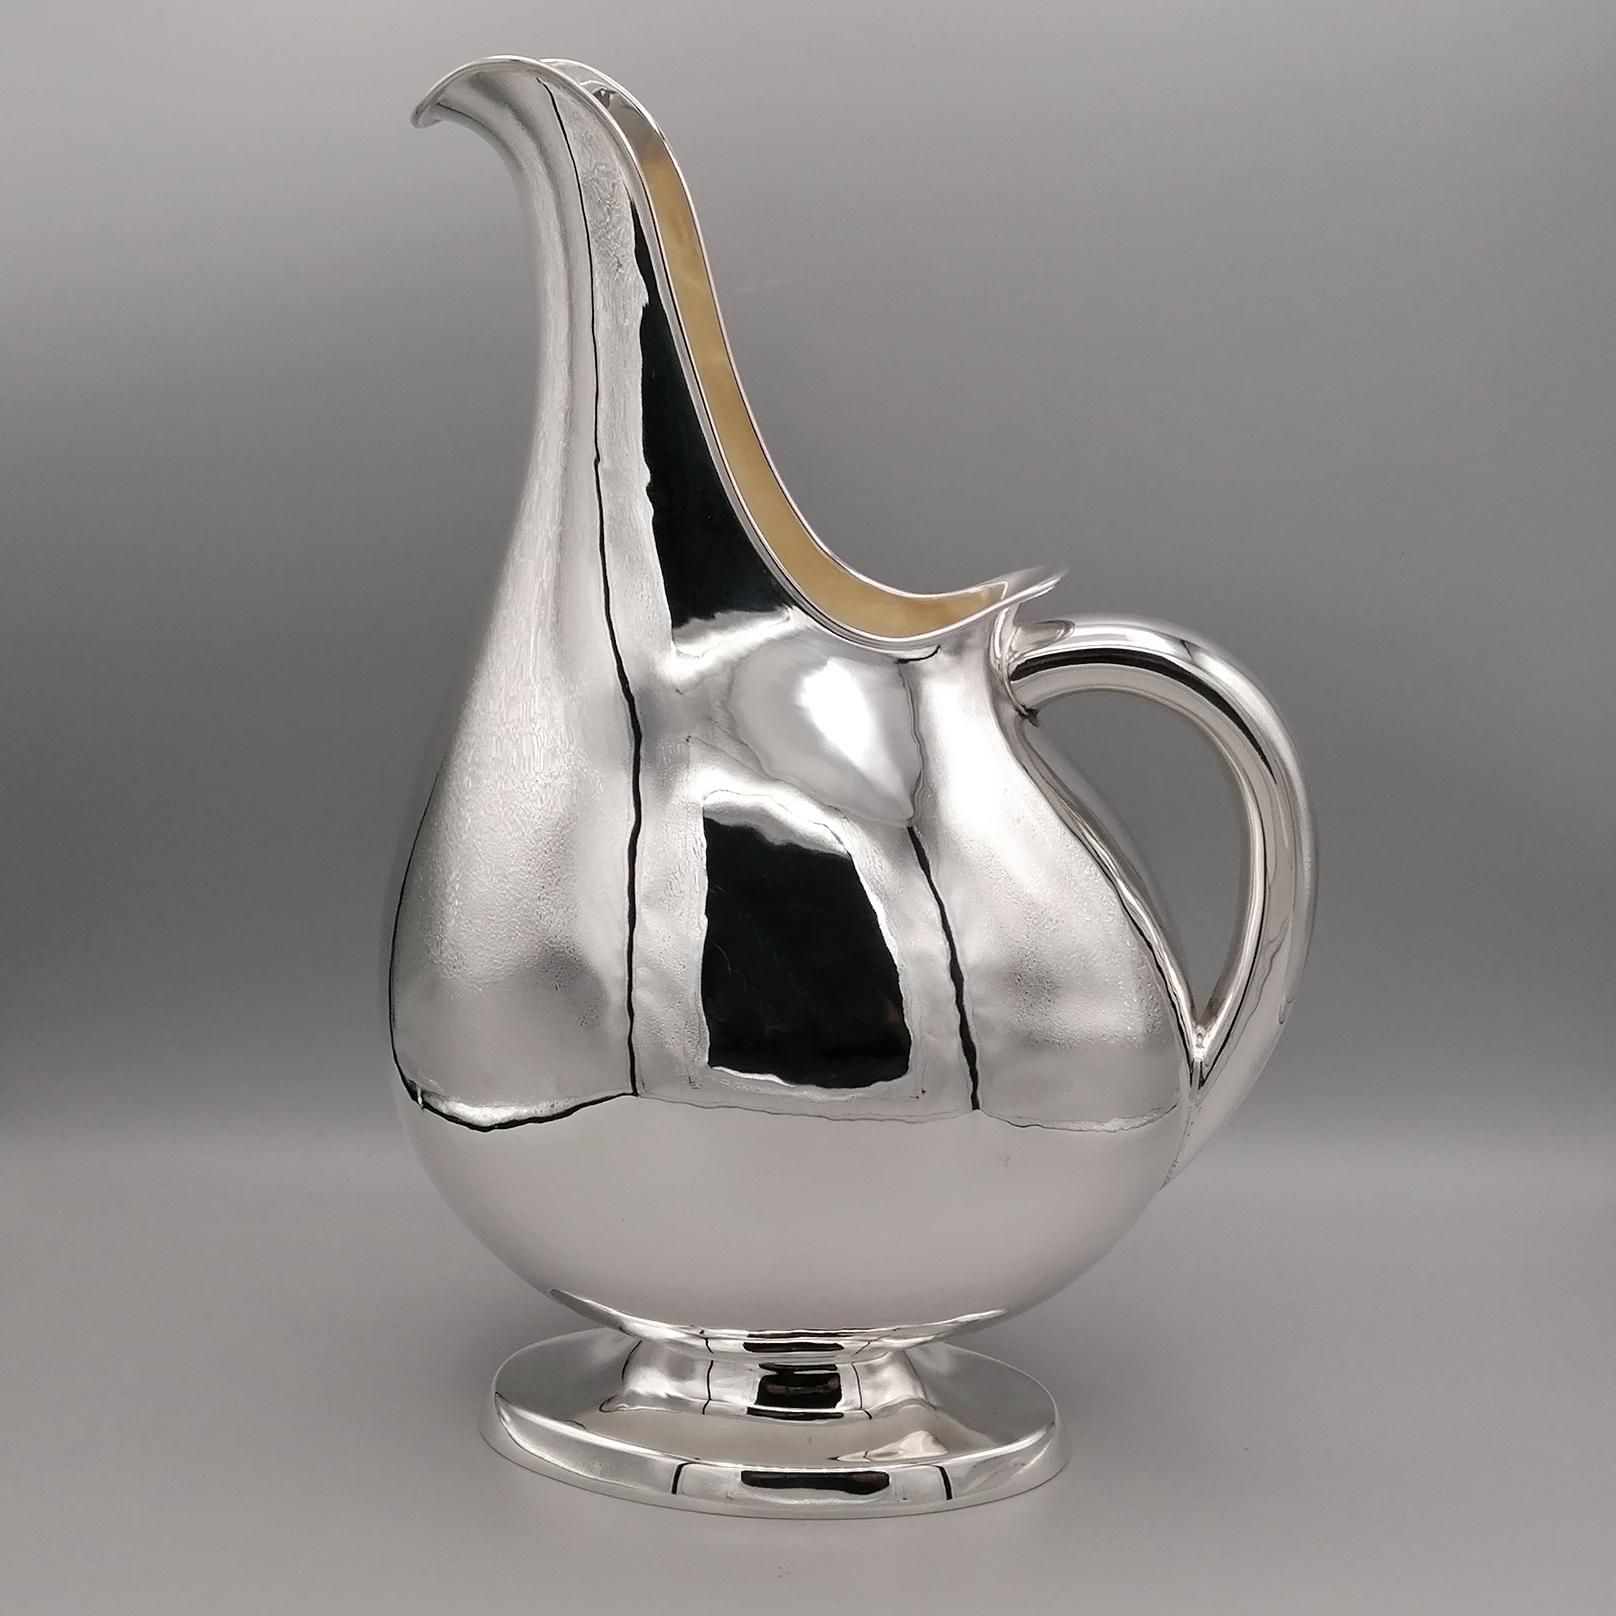 Modern style solid silver pitcher.
The shape of the jug is oval and has been completely handmade from an 800 silver plate.
The body of the object is lightly hammered.
The handle is oval and completely smooth.
The elongated upward shape makes it